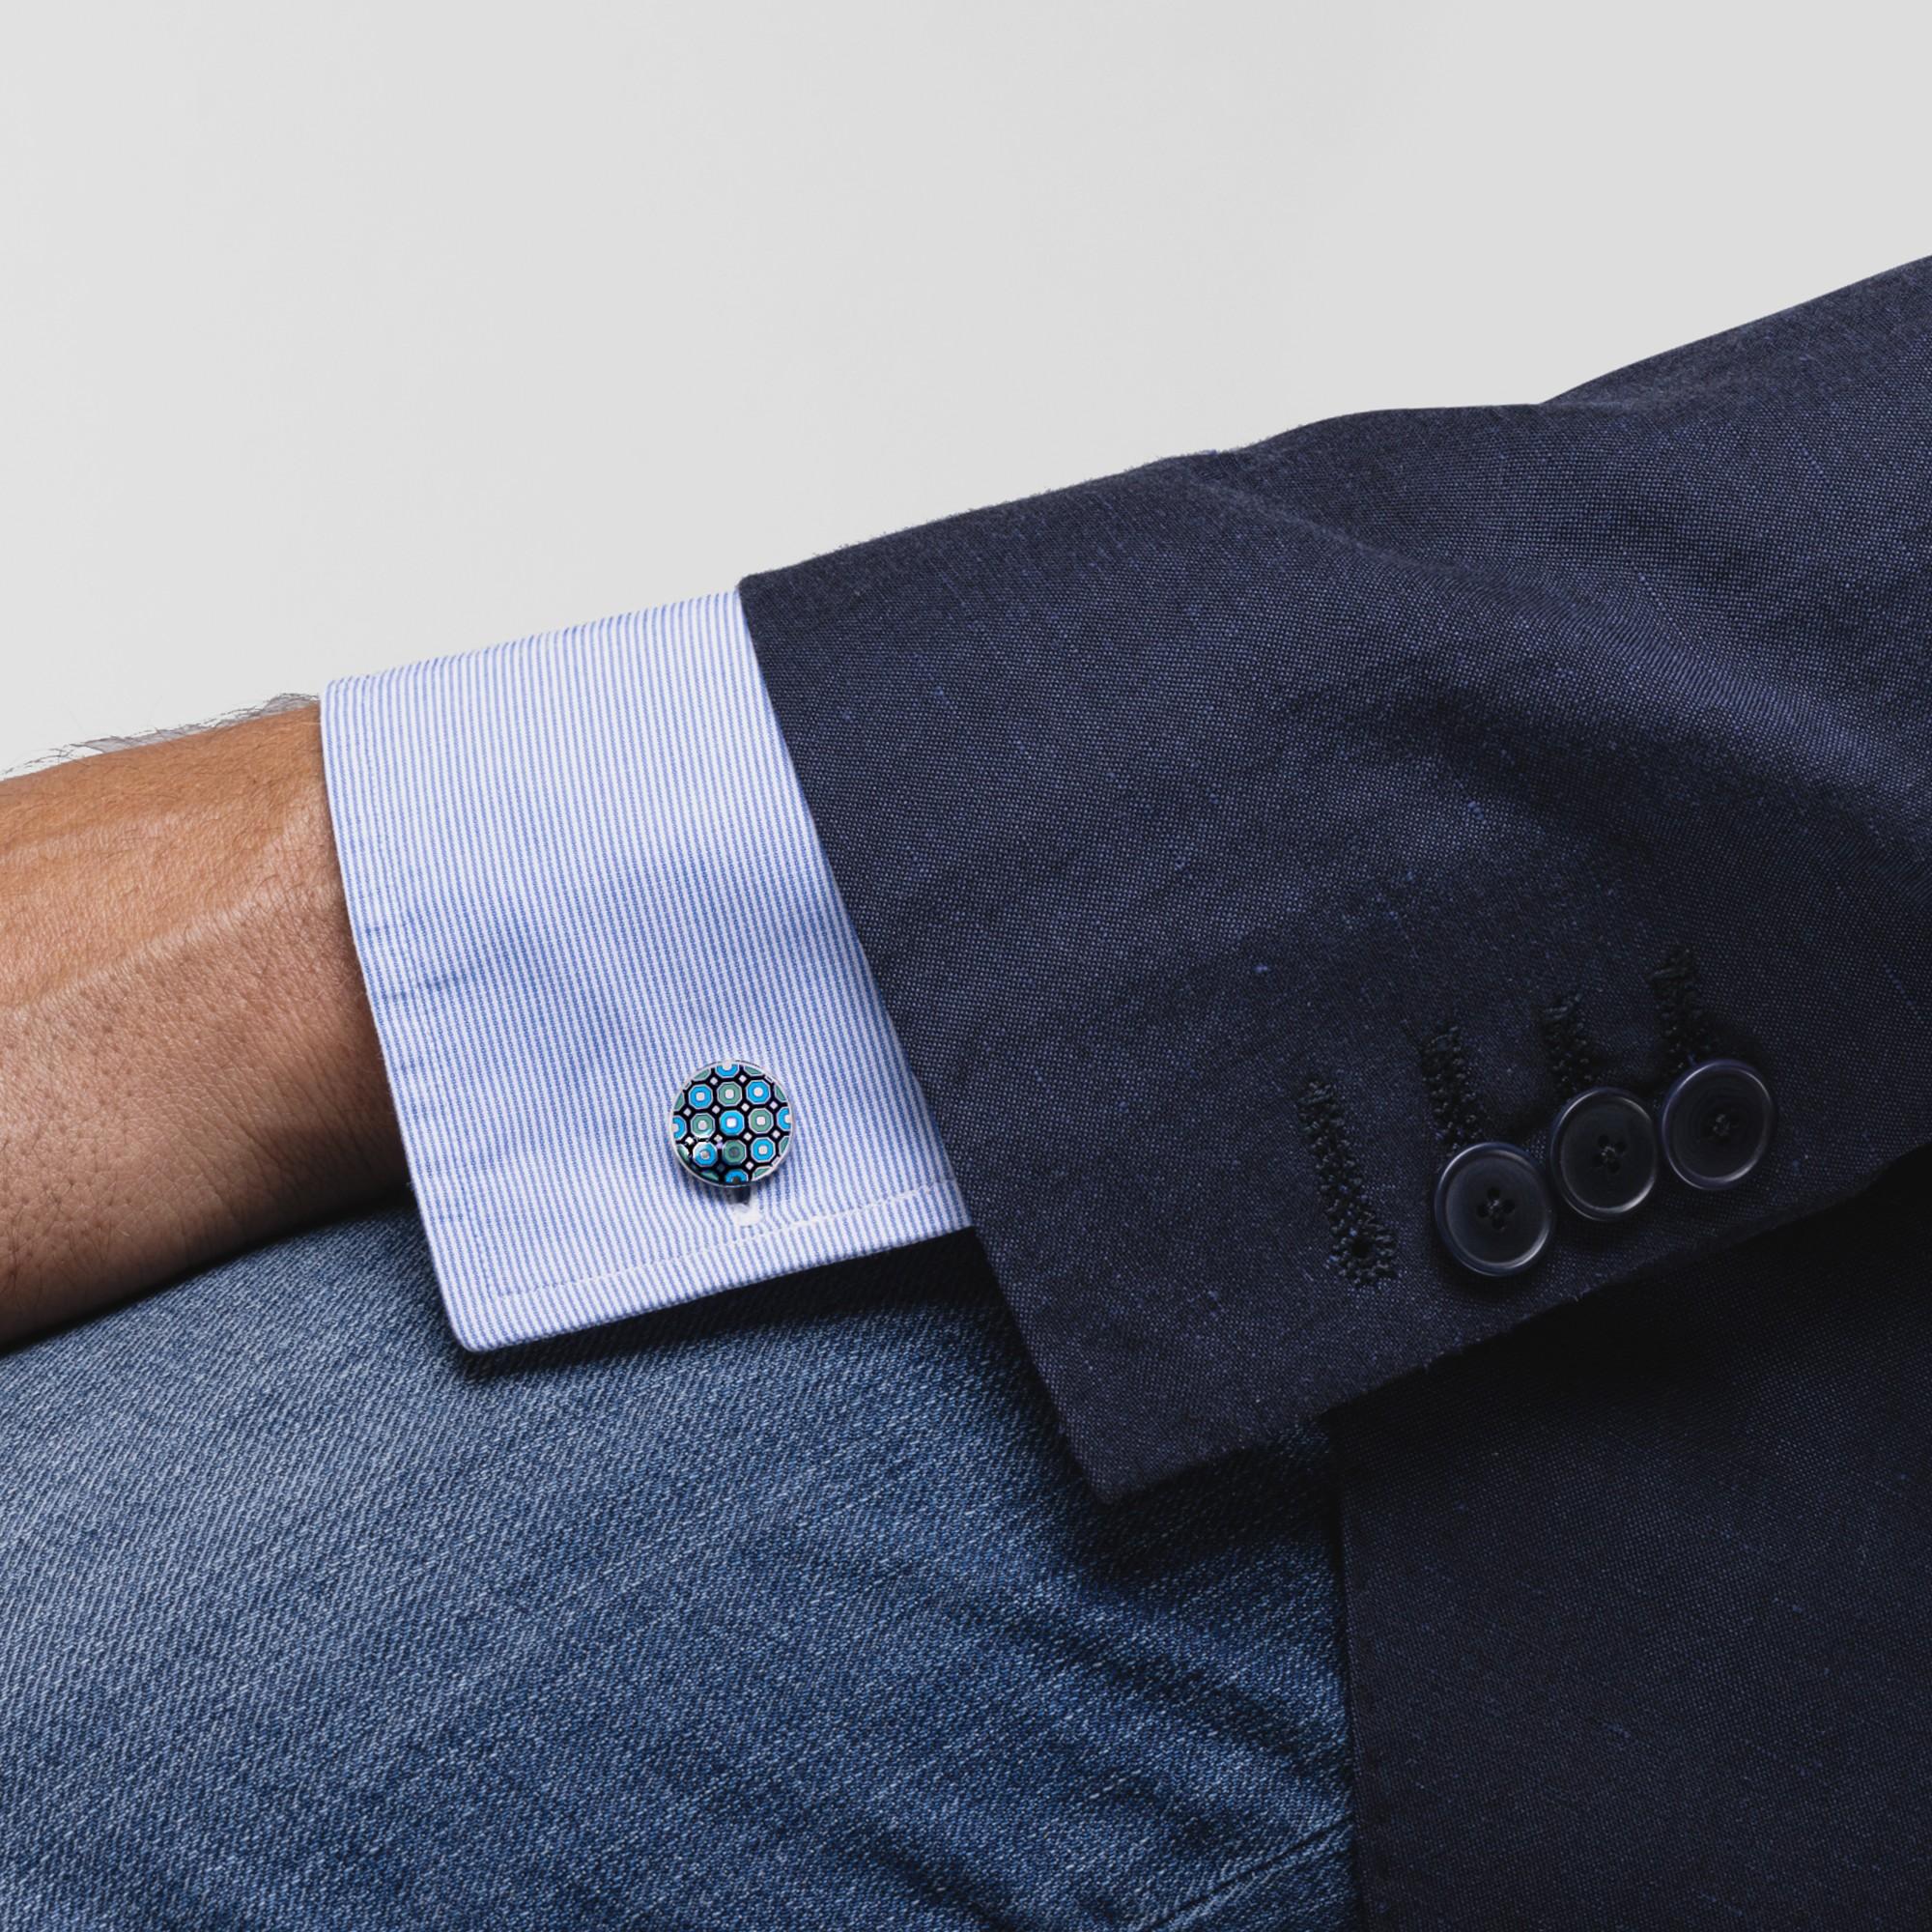 Alex Jona design collection, hand crafted in Italy, rhodium plated Sterling Silver cufflinks with blue, green and black enamel. These cufflinks feature a T-Bar fastening, aiding in easy use and confidence that they'll stay secured to your shirt. 